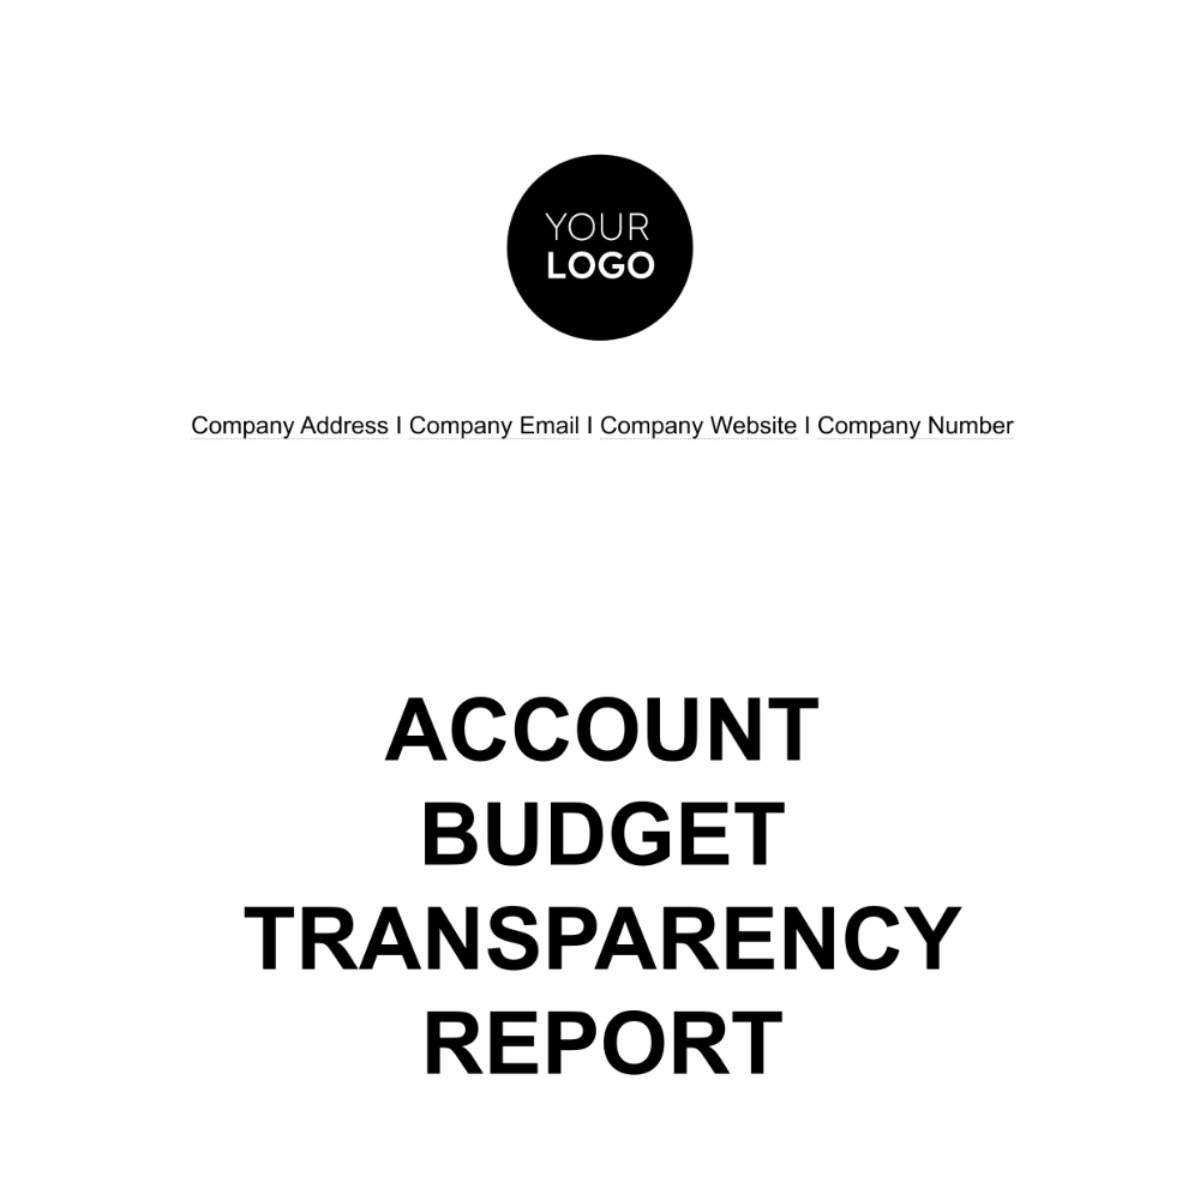 Account Budget Transparency Report Template